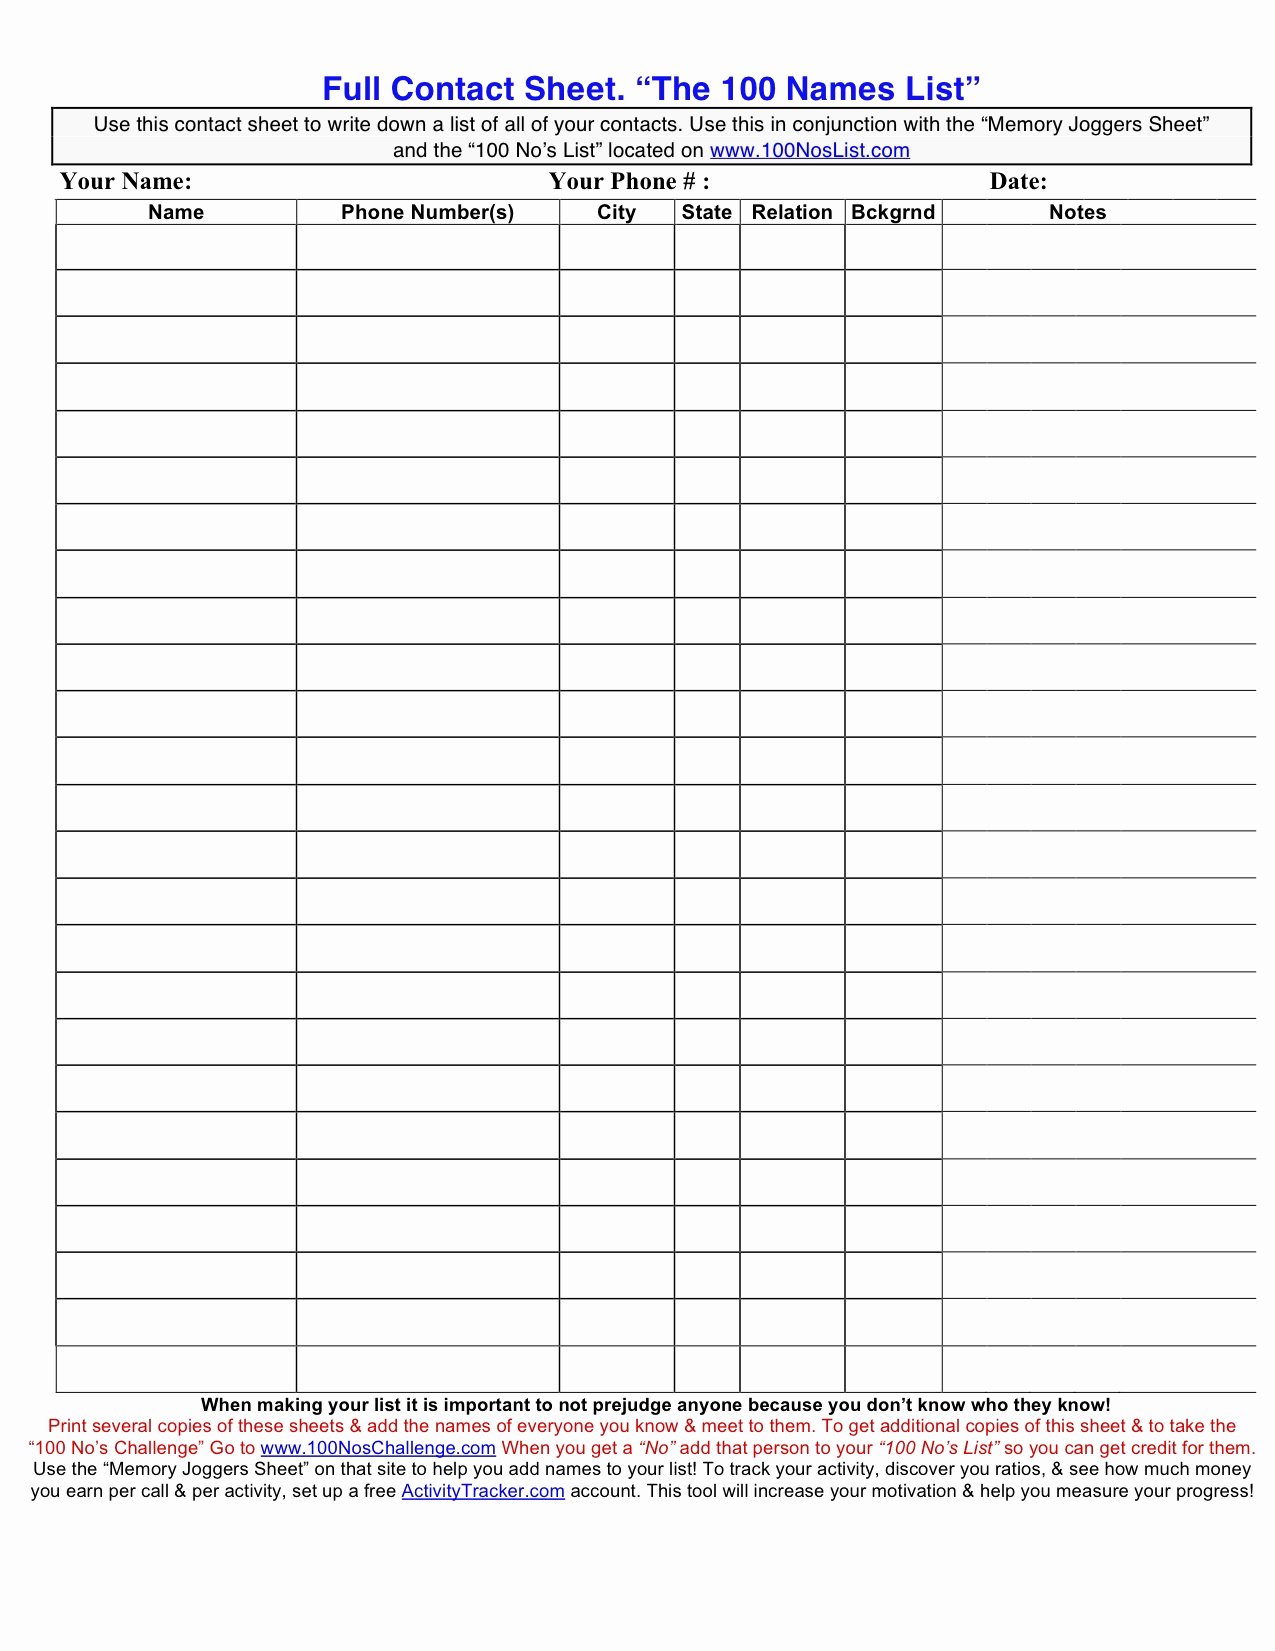 Sales Sheet Template Free Awesome the 100 No’s List and Challenge